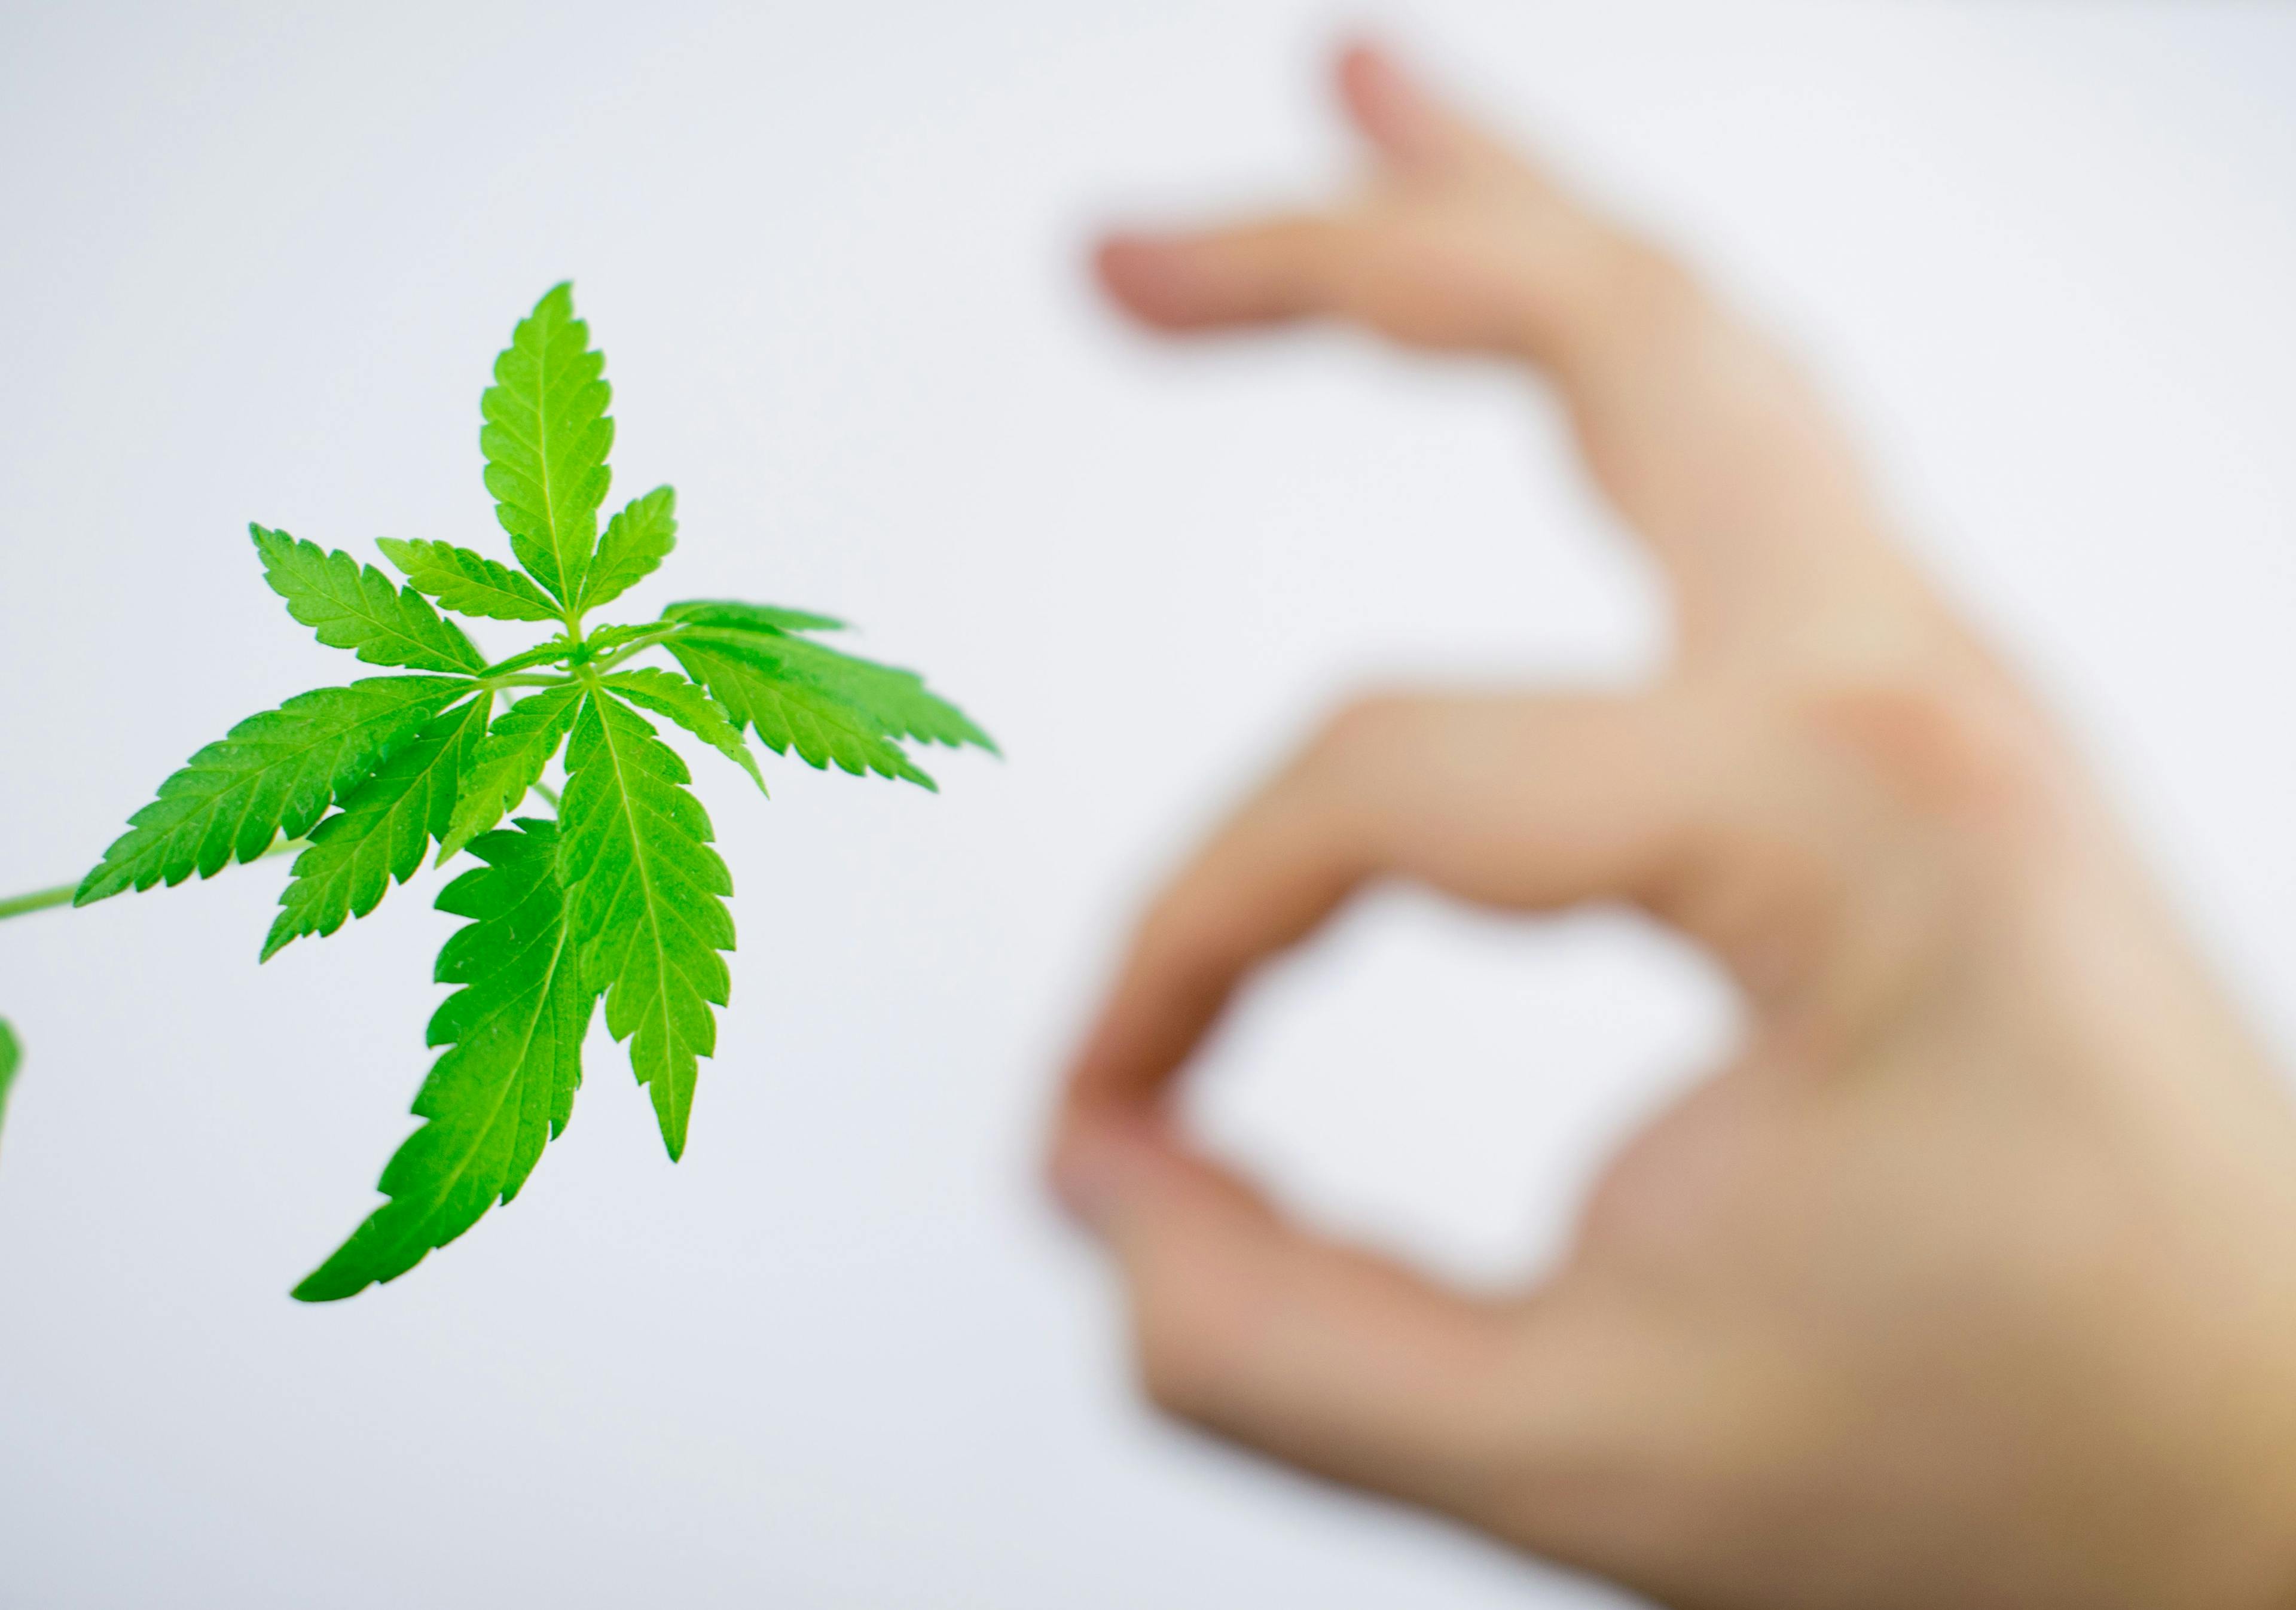 Sprout of cannabis (marijuana) on a light background with a broken arm in the background with a gesture OK. | Image Credit: © Konstiantyn Zapylaie - stock.adobe.com